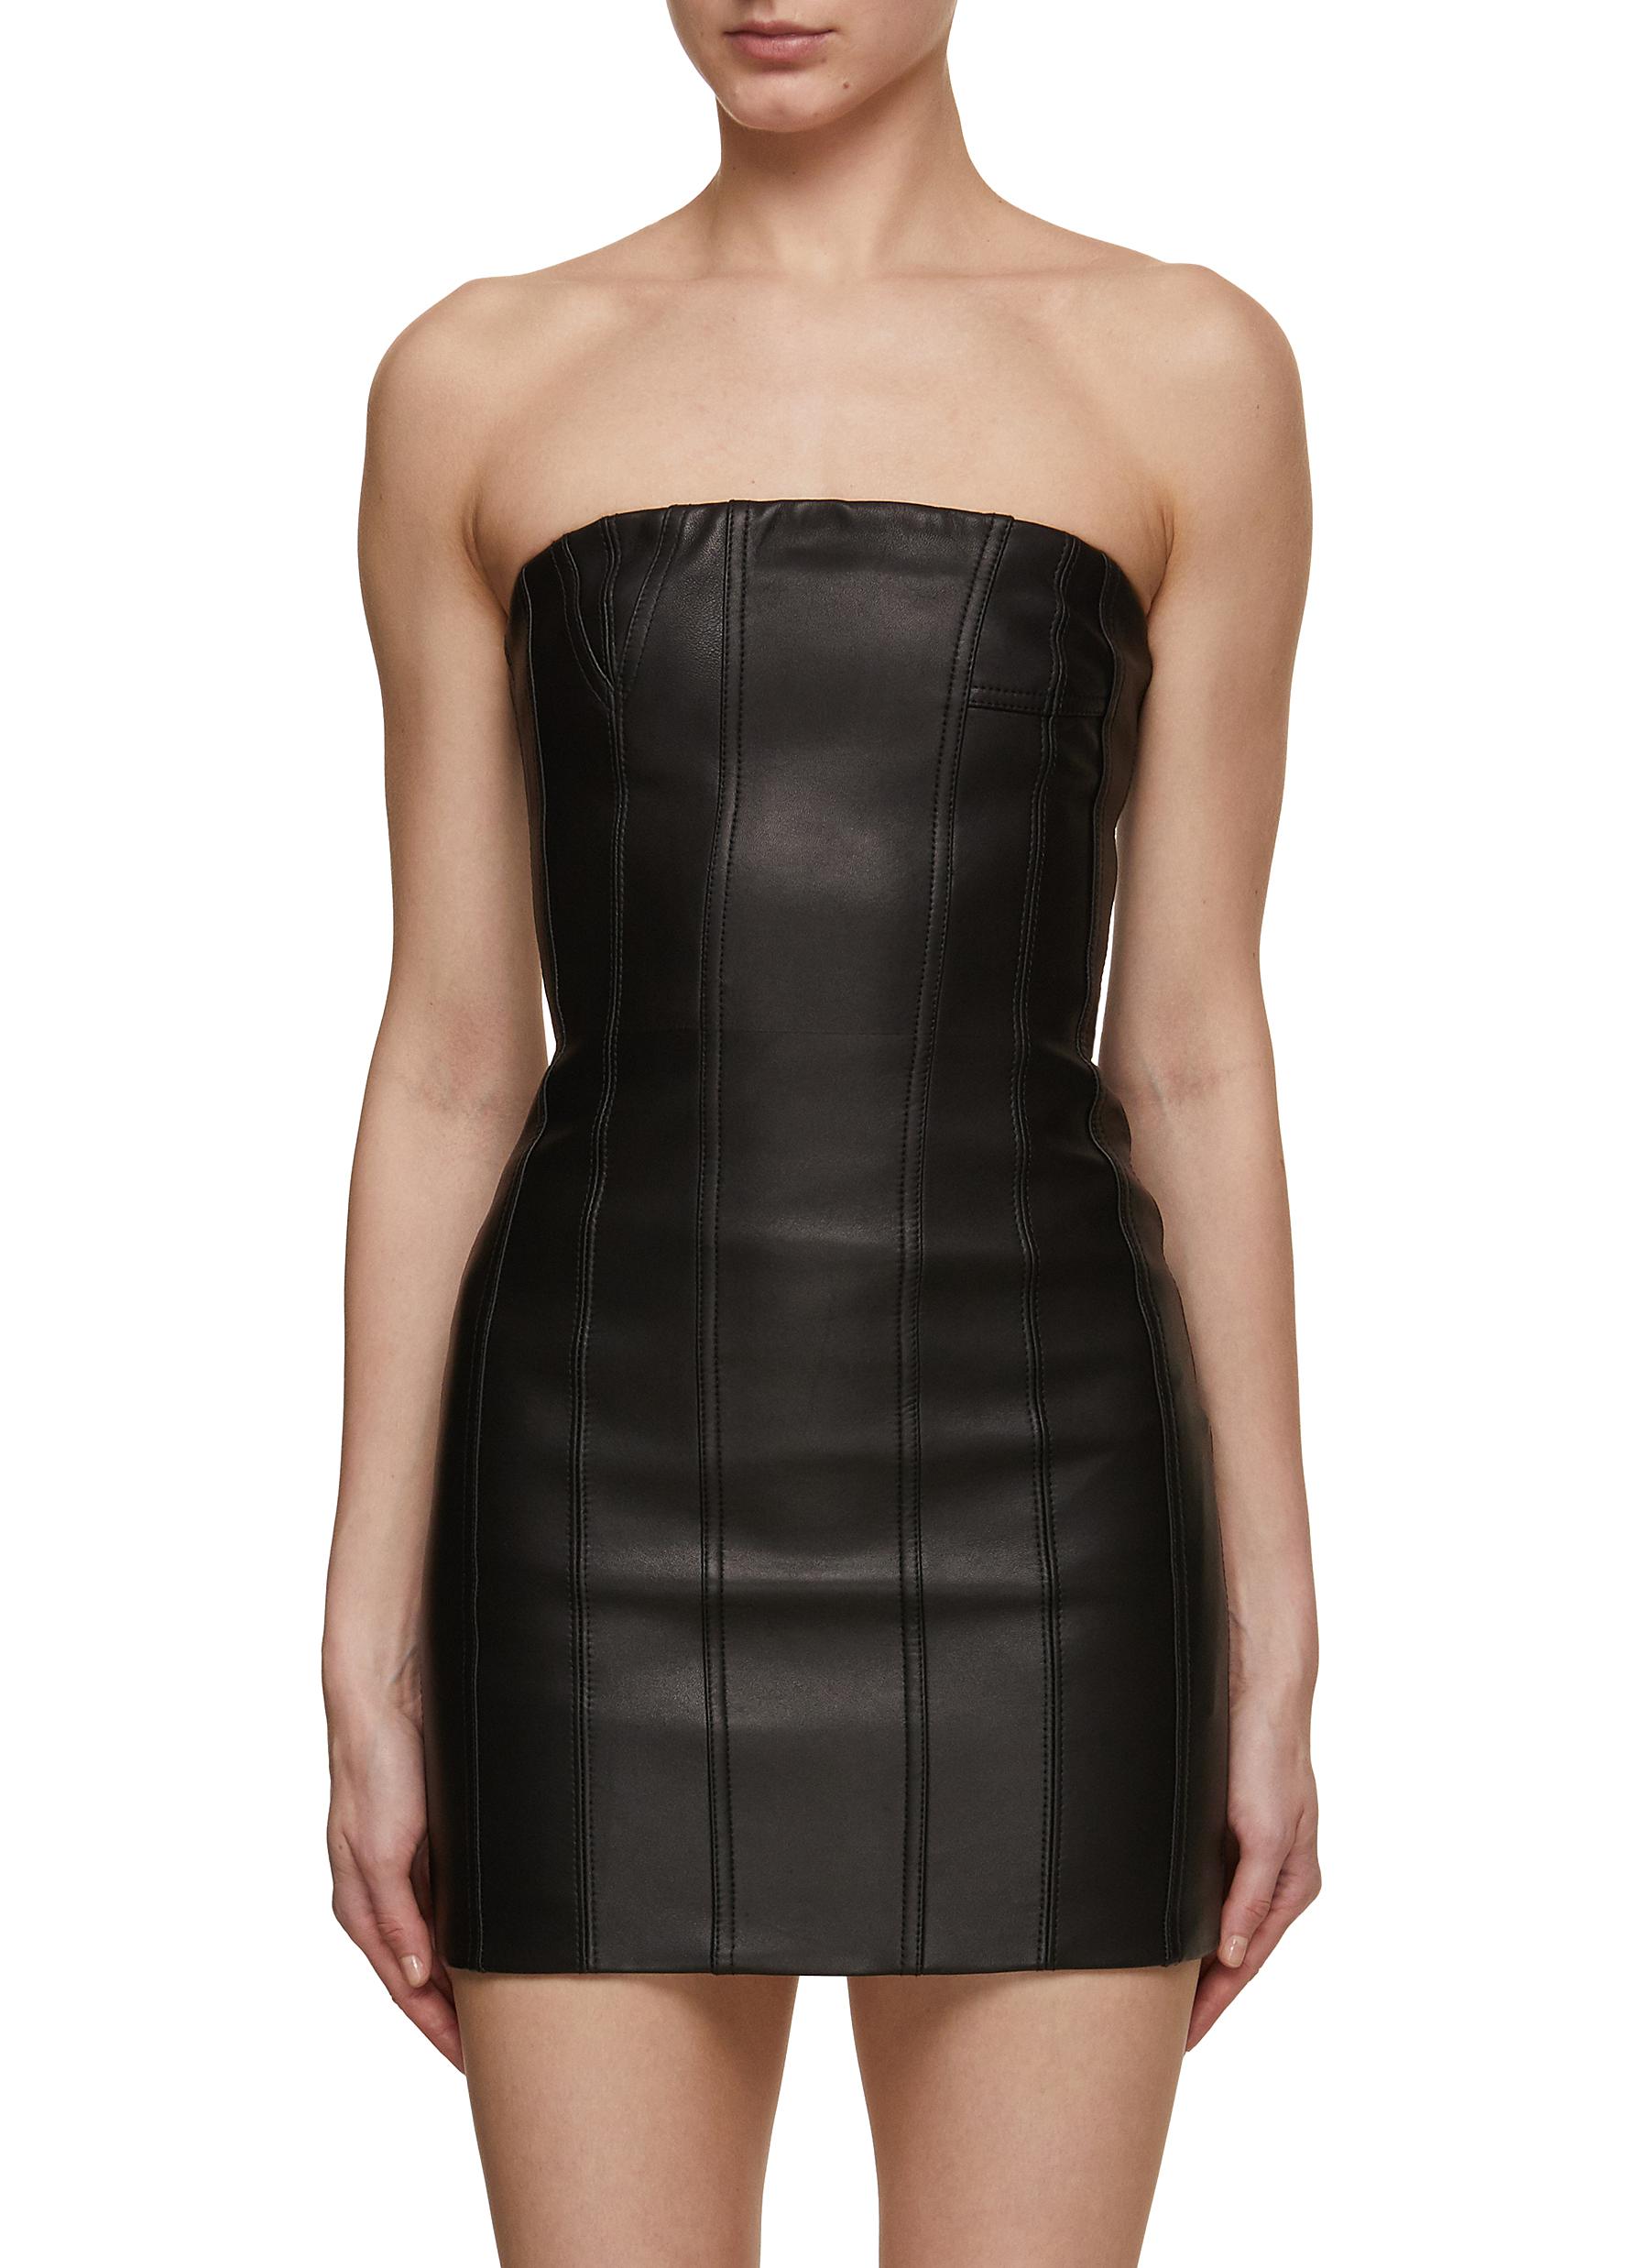 Strapless Leather Bustier Mini Dress